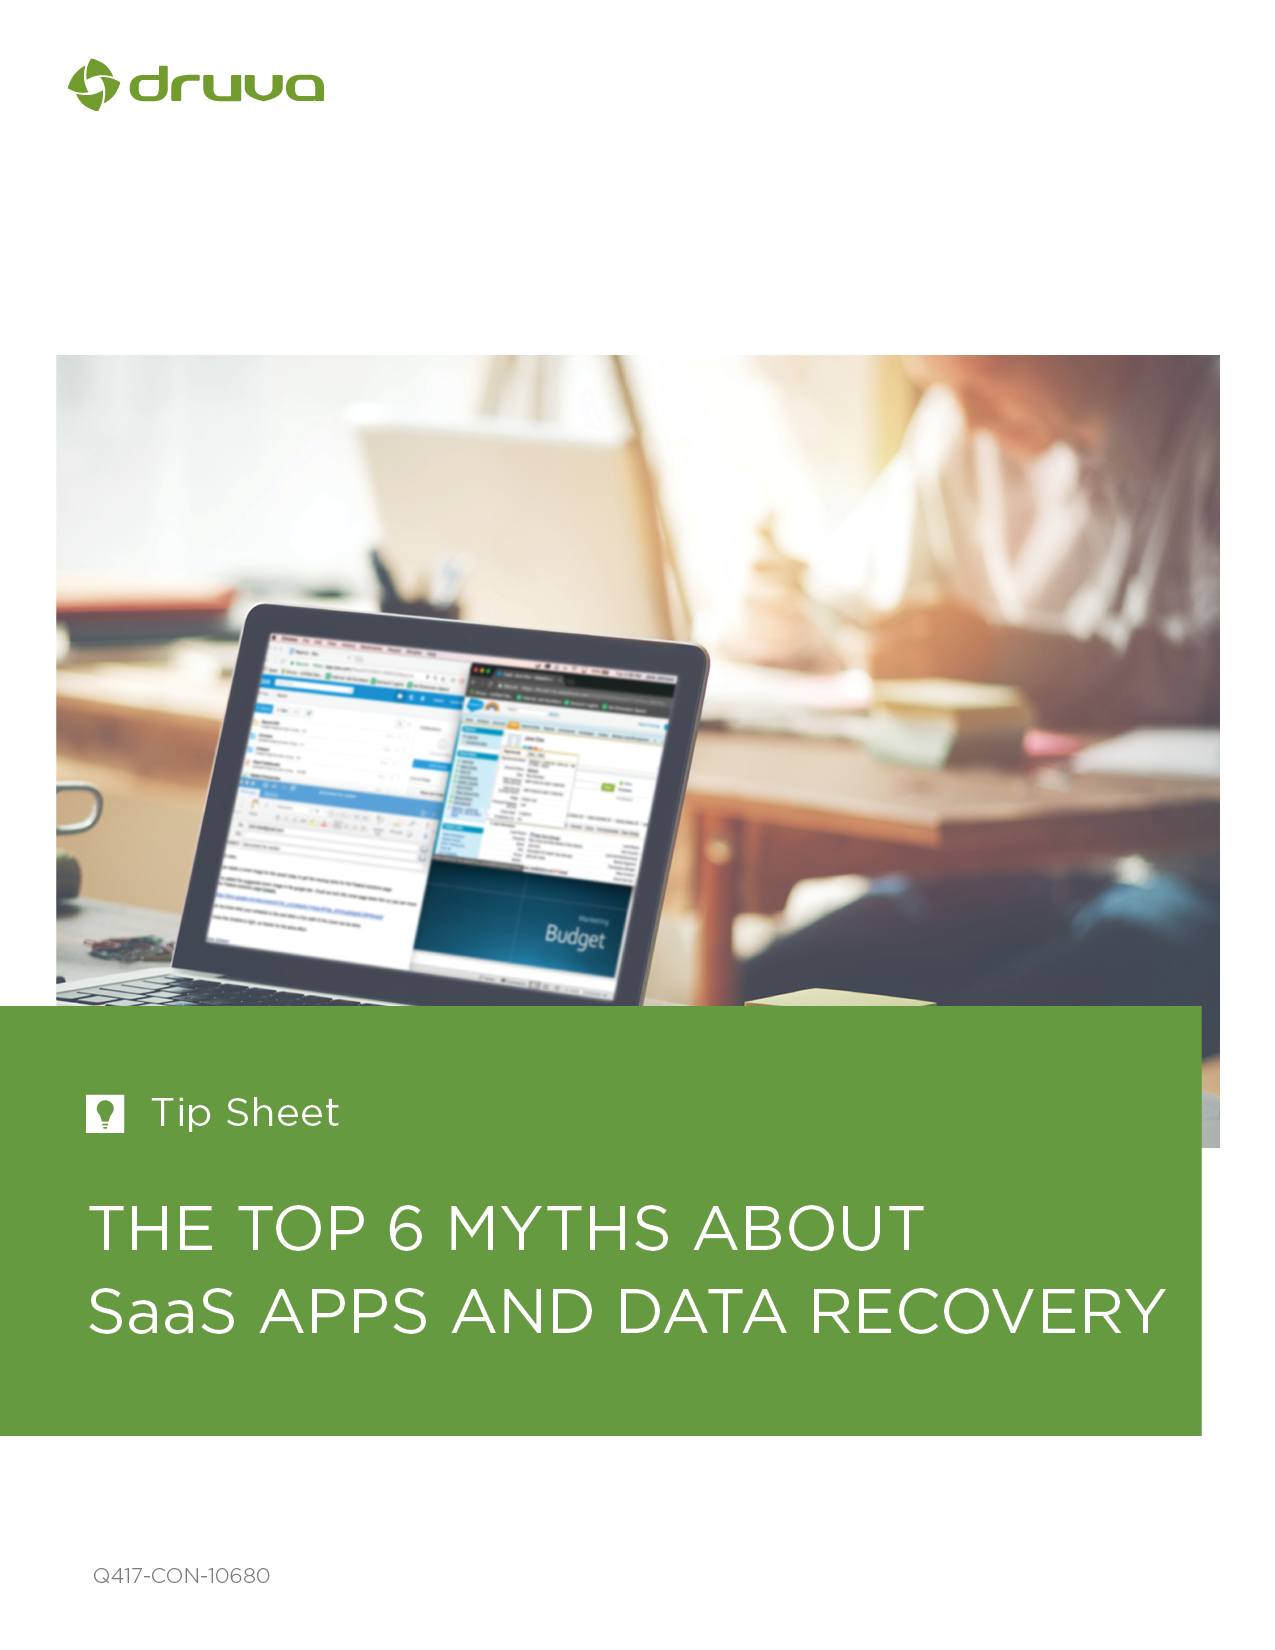 The Top 6 Myths About SaaS Apps and Data Recovery